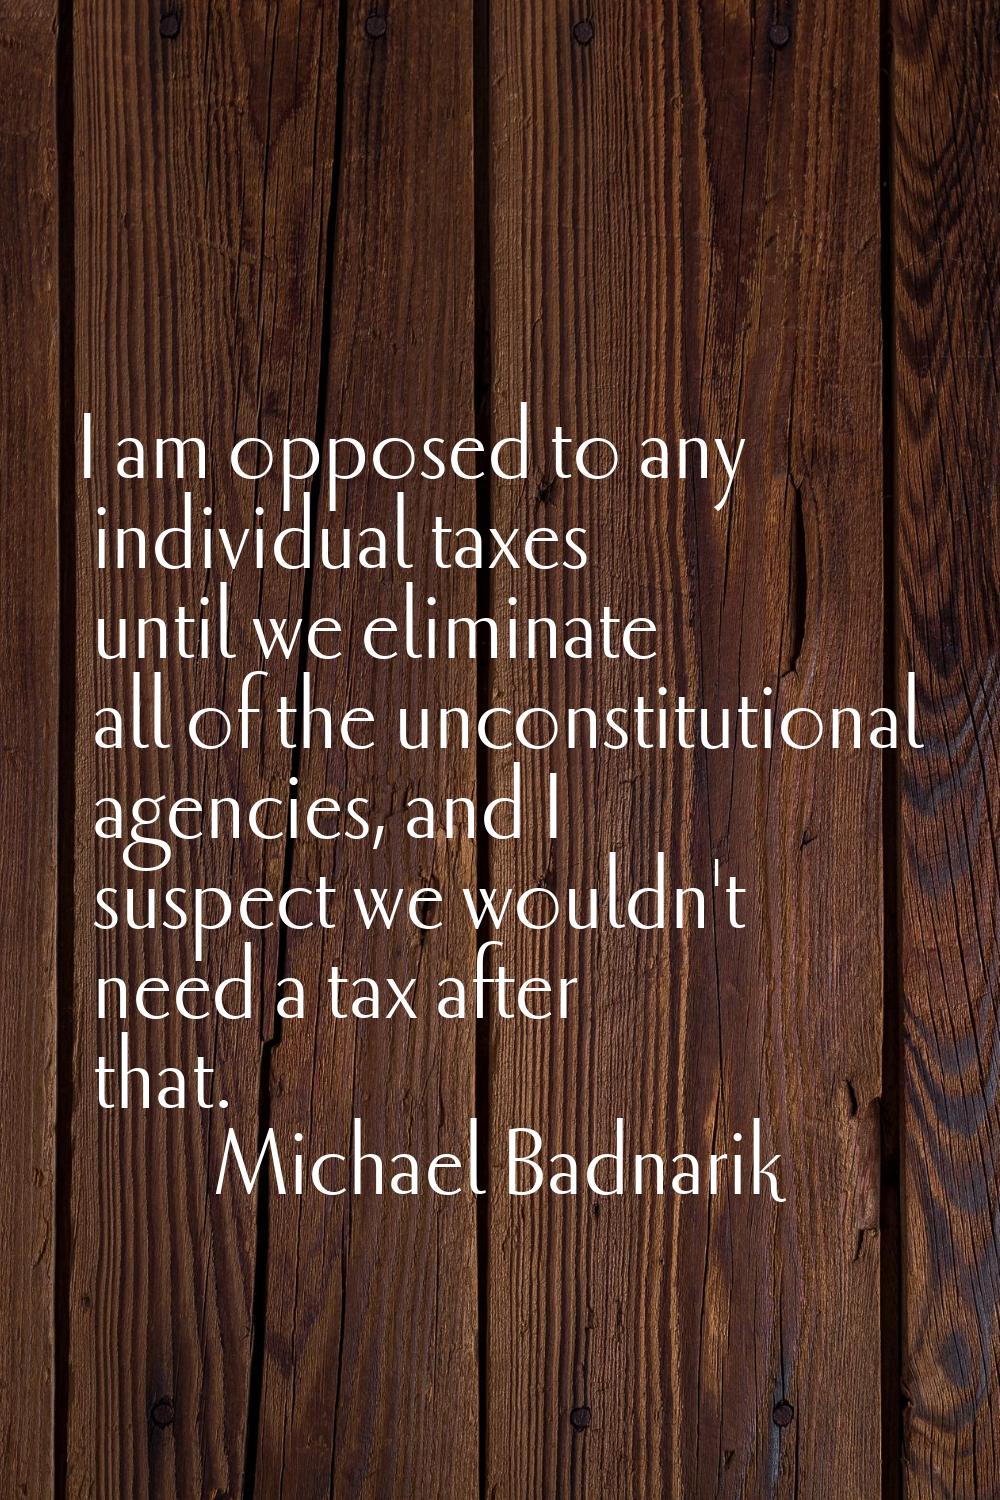 I am opposed to any individual taxes until we eliminate all of the unconstitutional agencies, and I